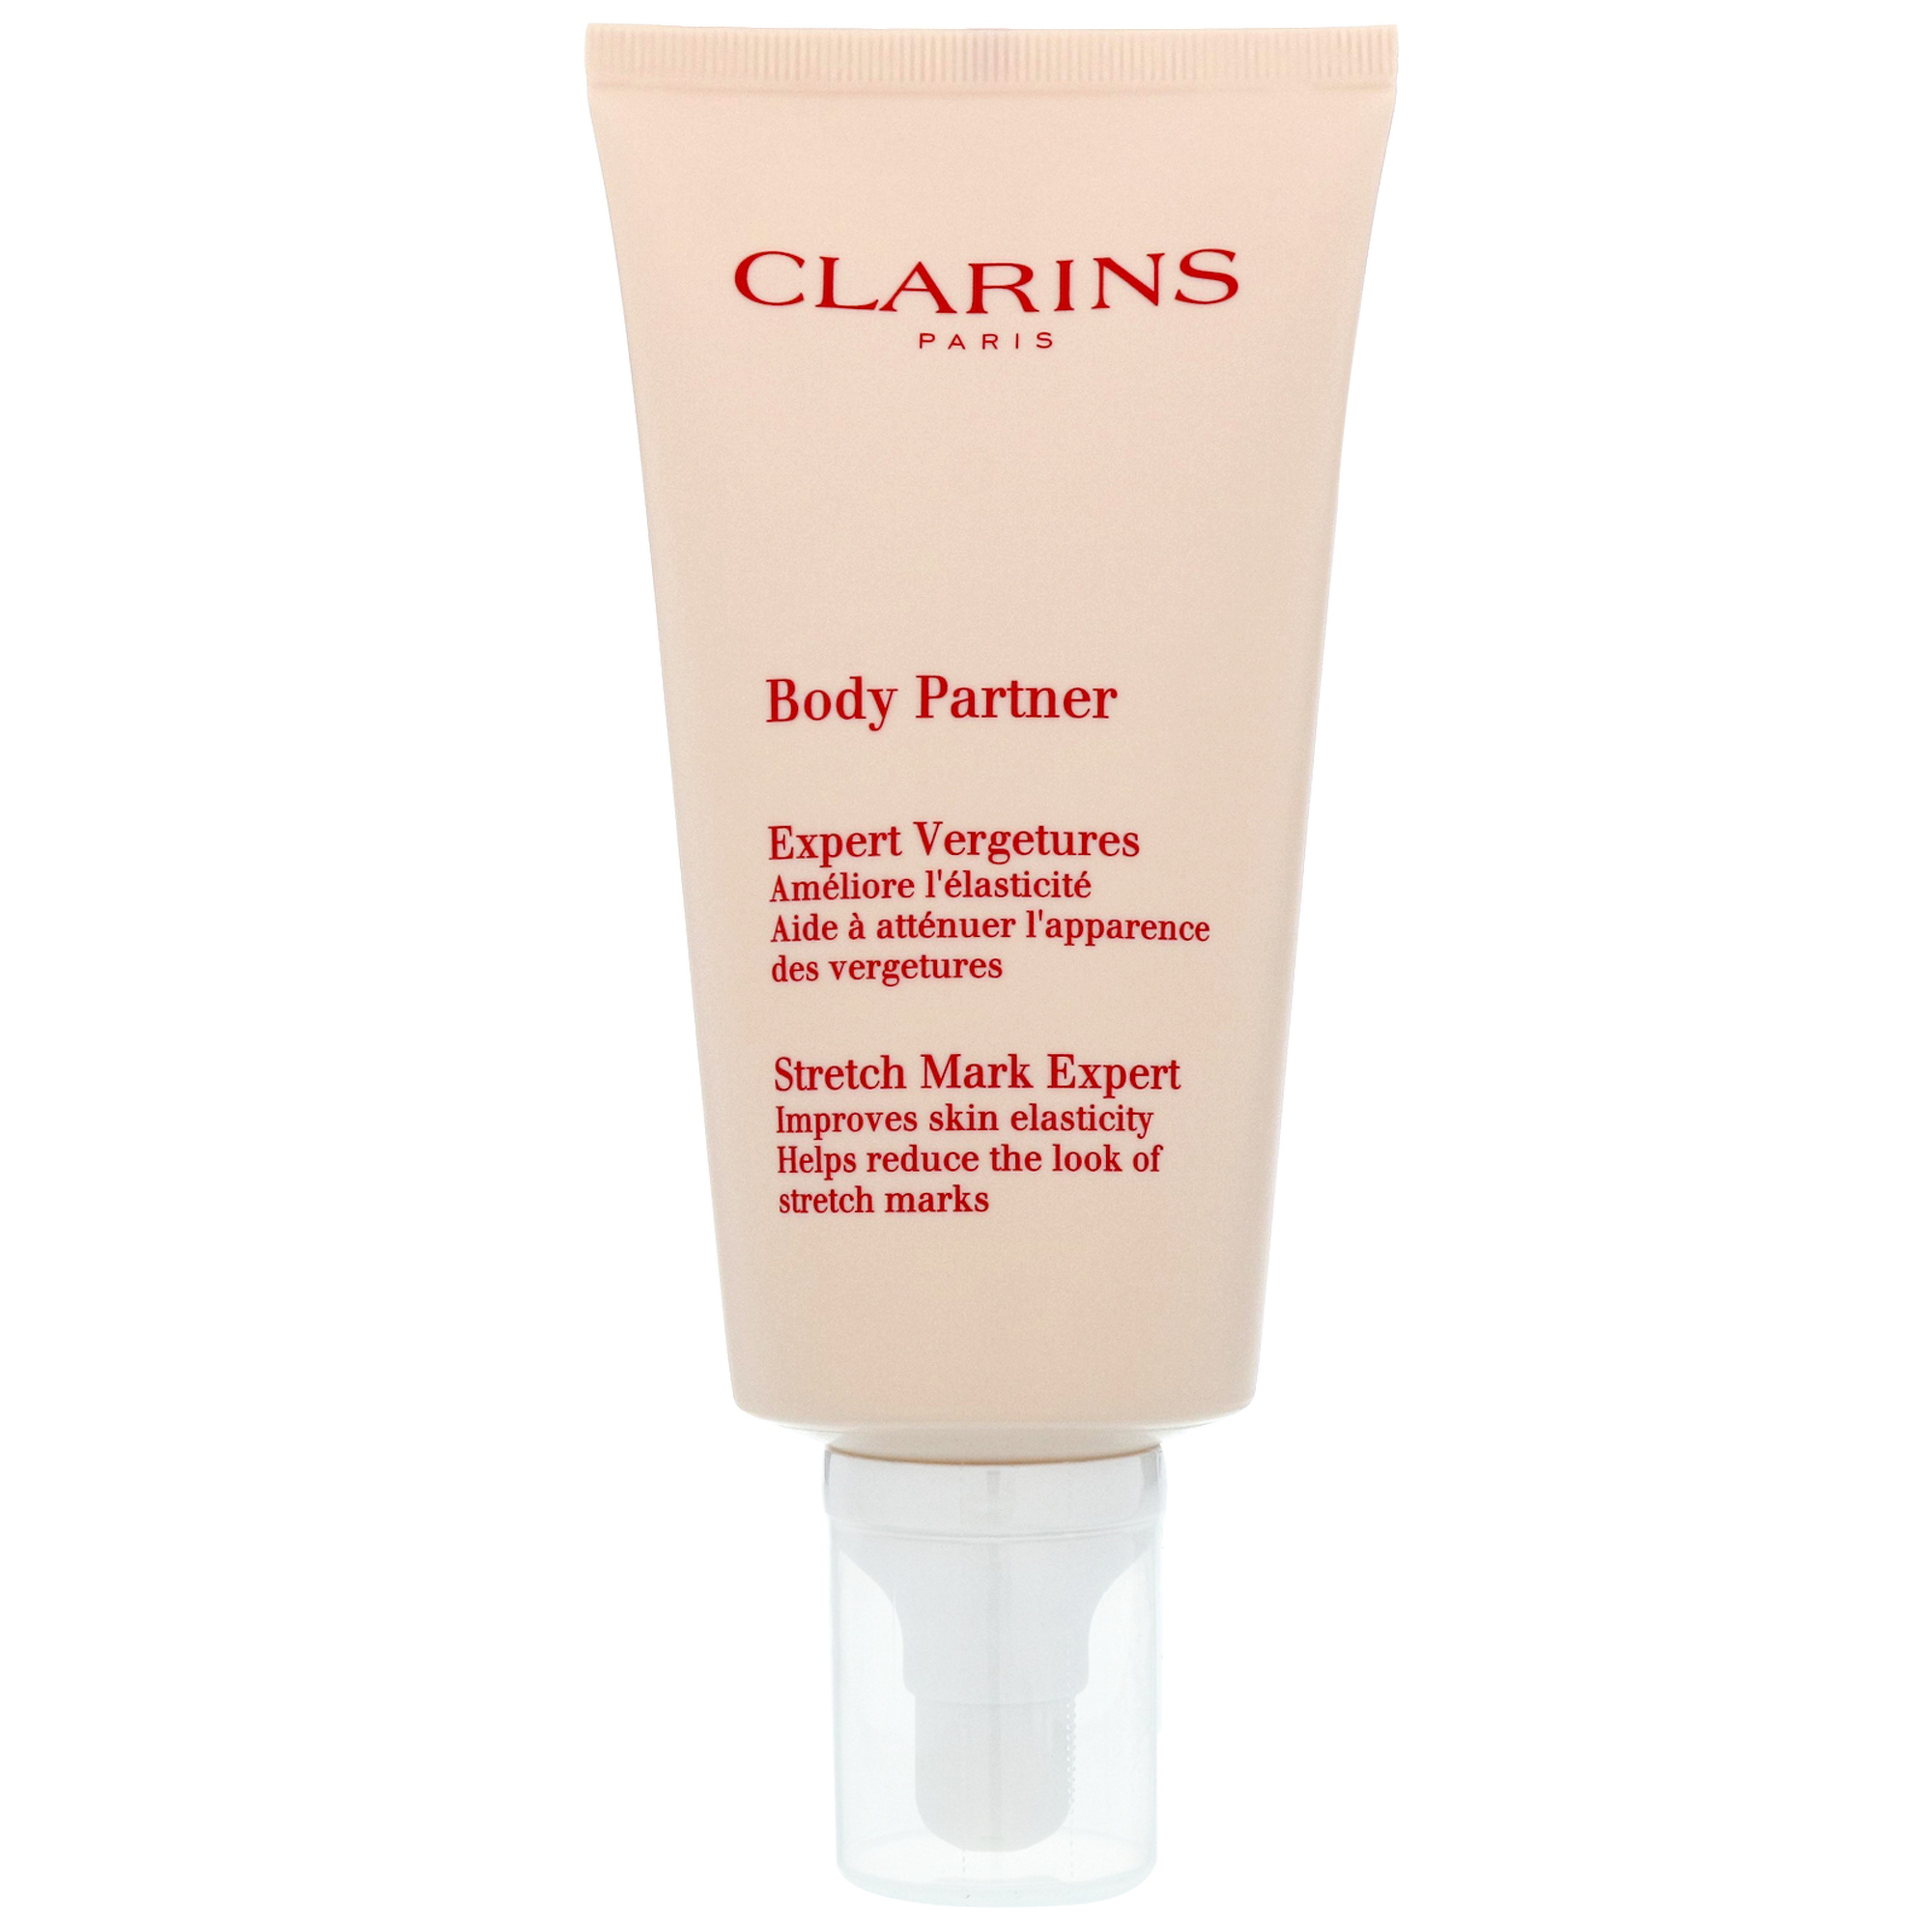 Image of Clarins Firming Treatment Body Partner Stretch Mark Expert 175ml